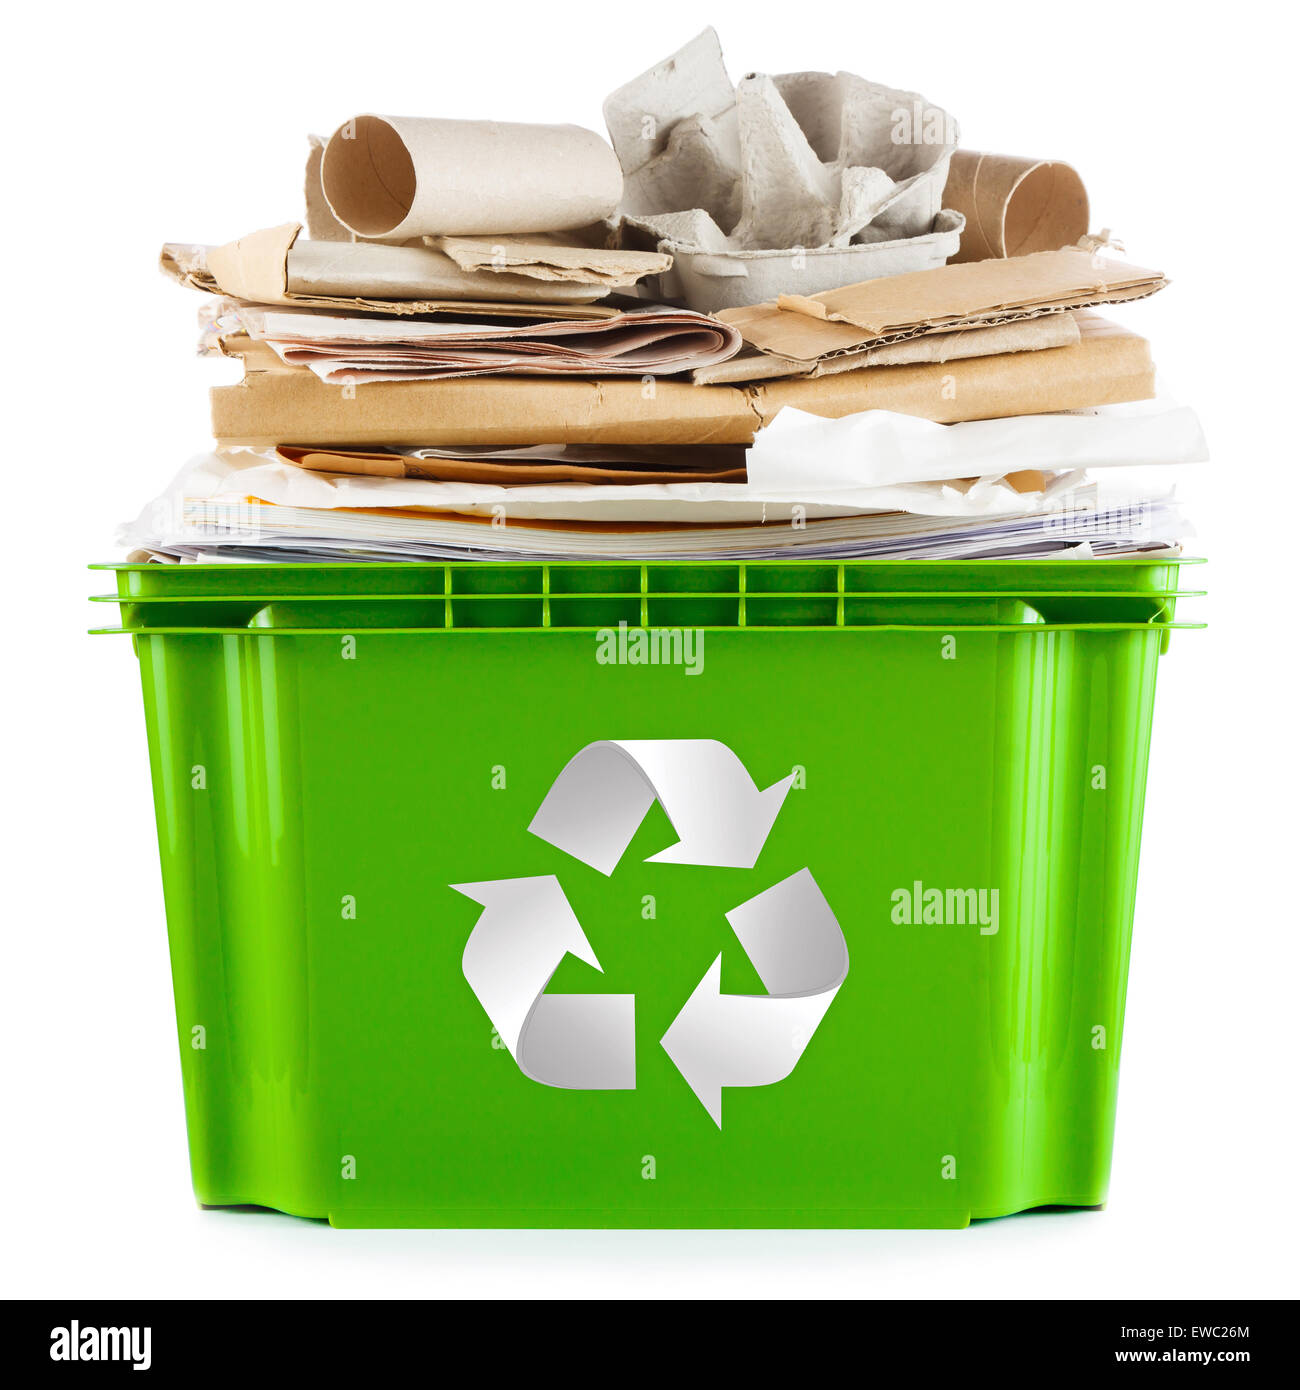 Recycling concept - bin full of old newspapers, paper, cardboard and egg boxes Stock Photo